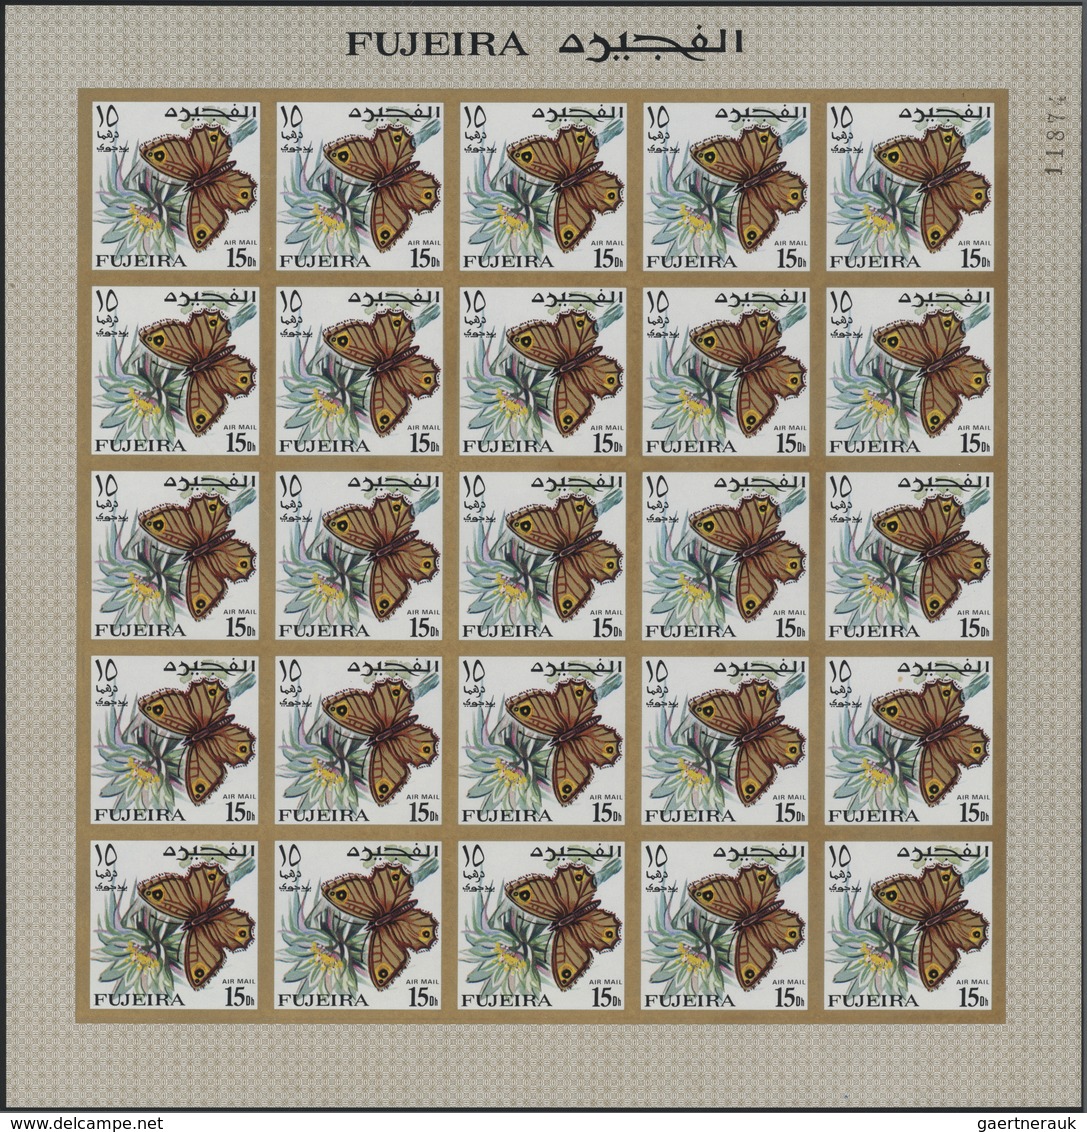 ** Fudschaira / Fujeira: 1967, Butterflies, imperforate issue, 1dh. to 5r., complete set of 27 values e